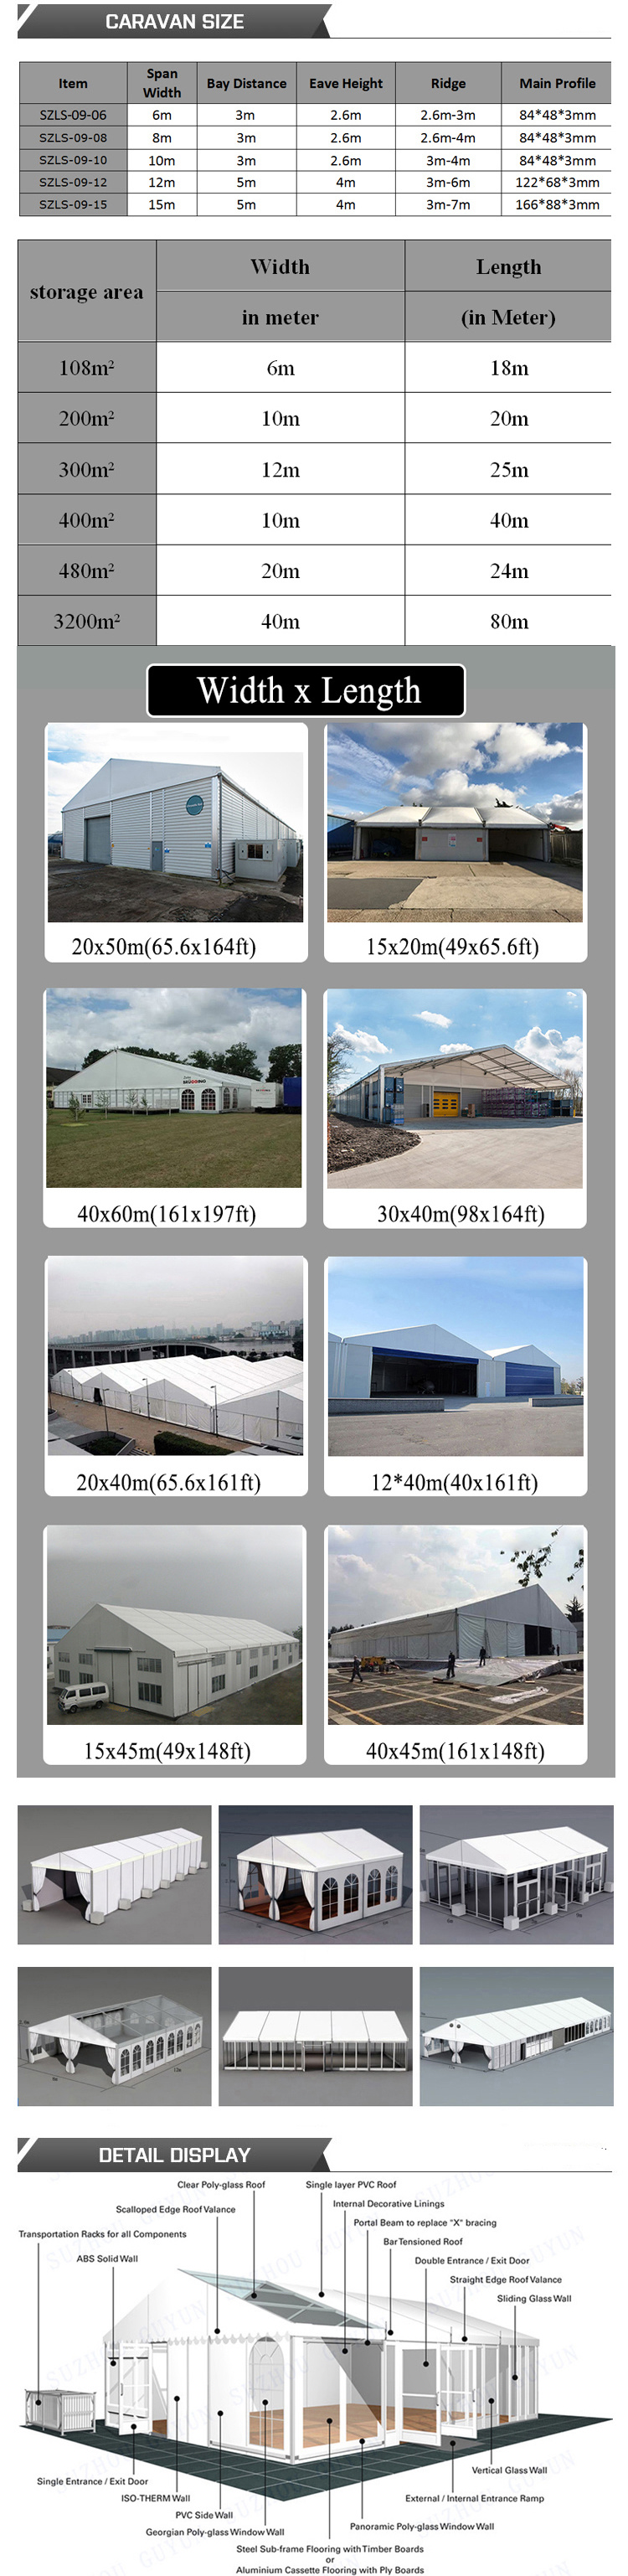 Aluminum Big Event Clear Span Roof Wedding Party Tents for 200 People for Sale